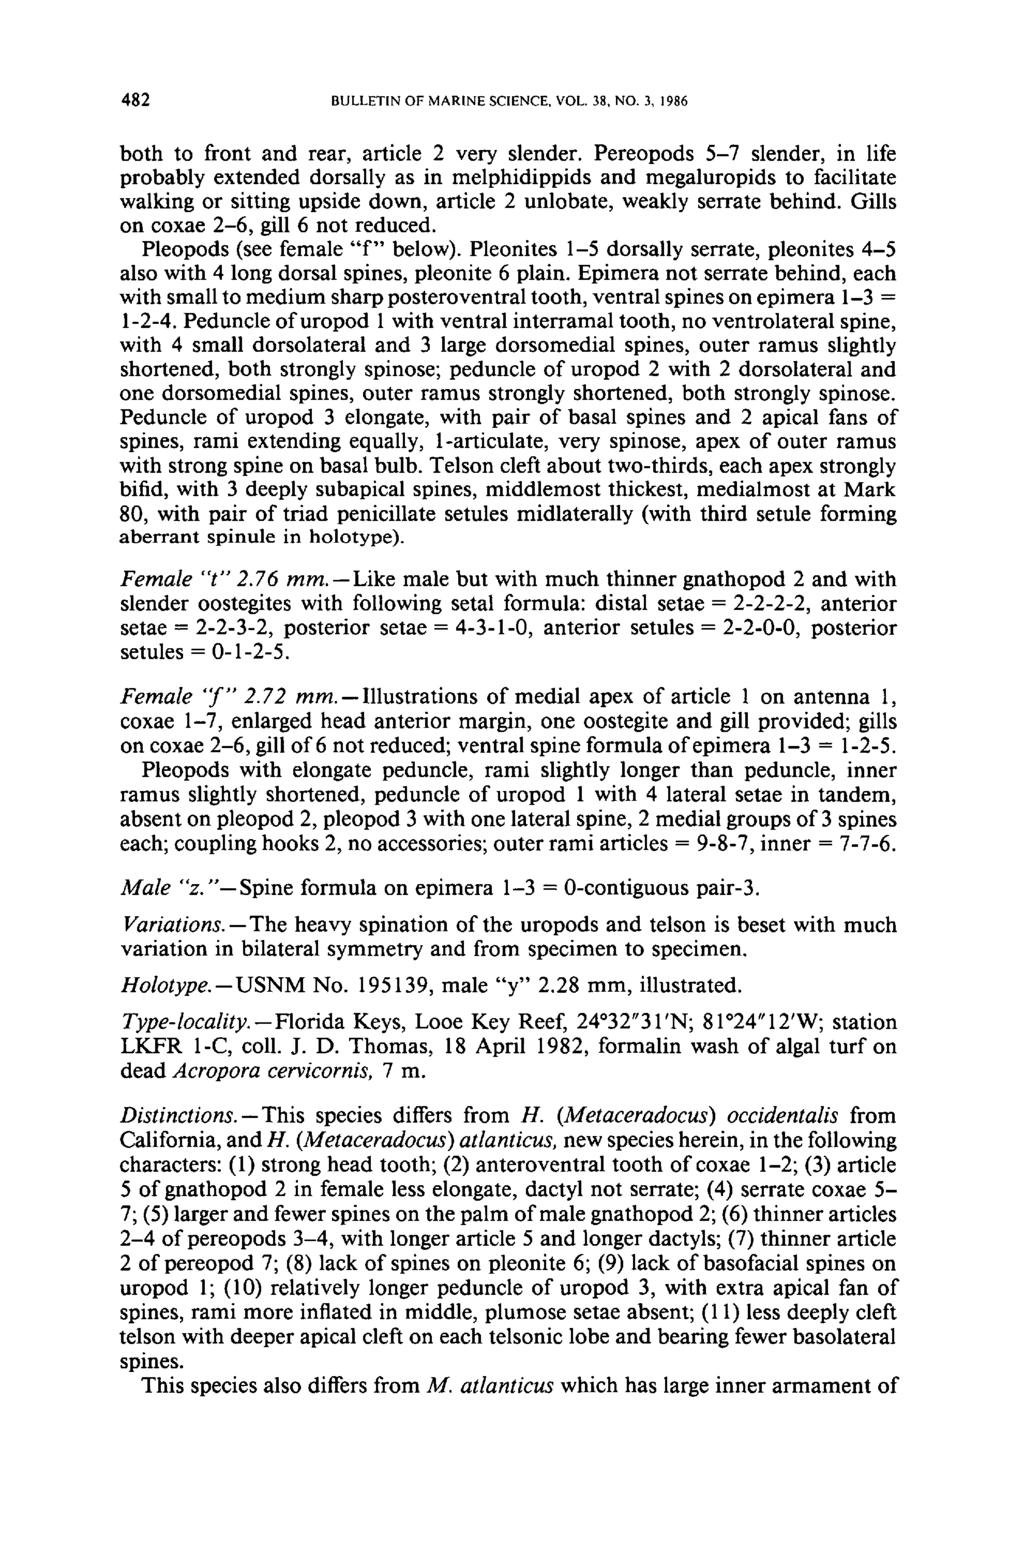 482 BULLETIN OF MARINE SCIENCE, VOL. 38, NO.3, 1986 both to front and rear, article 2 very slender.